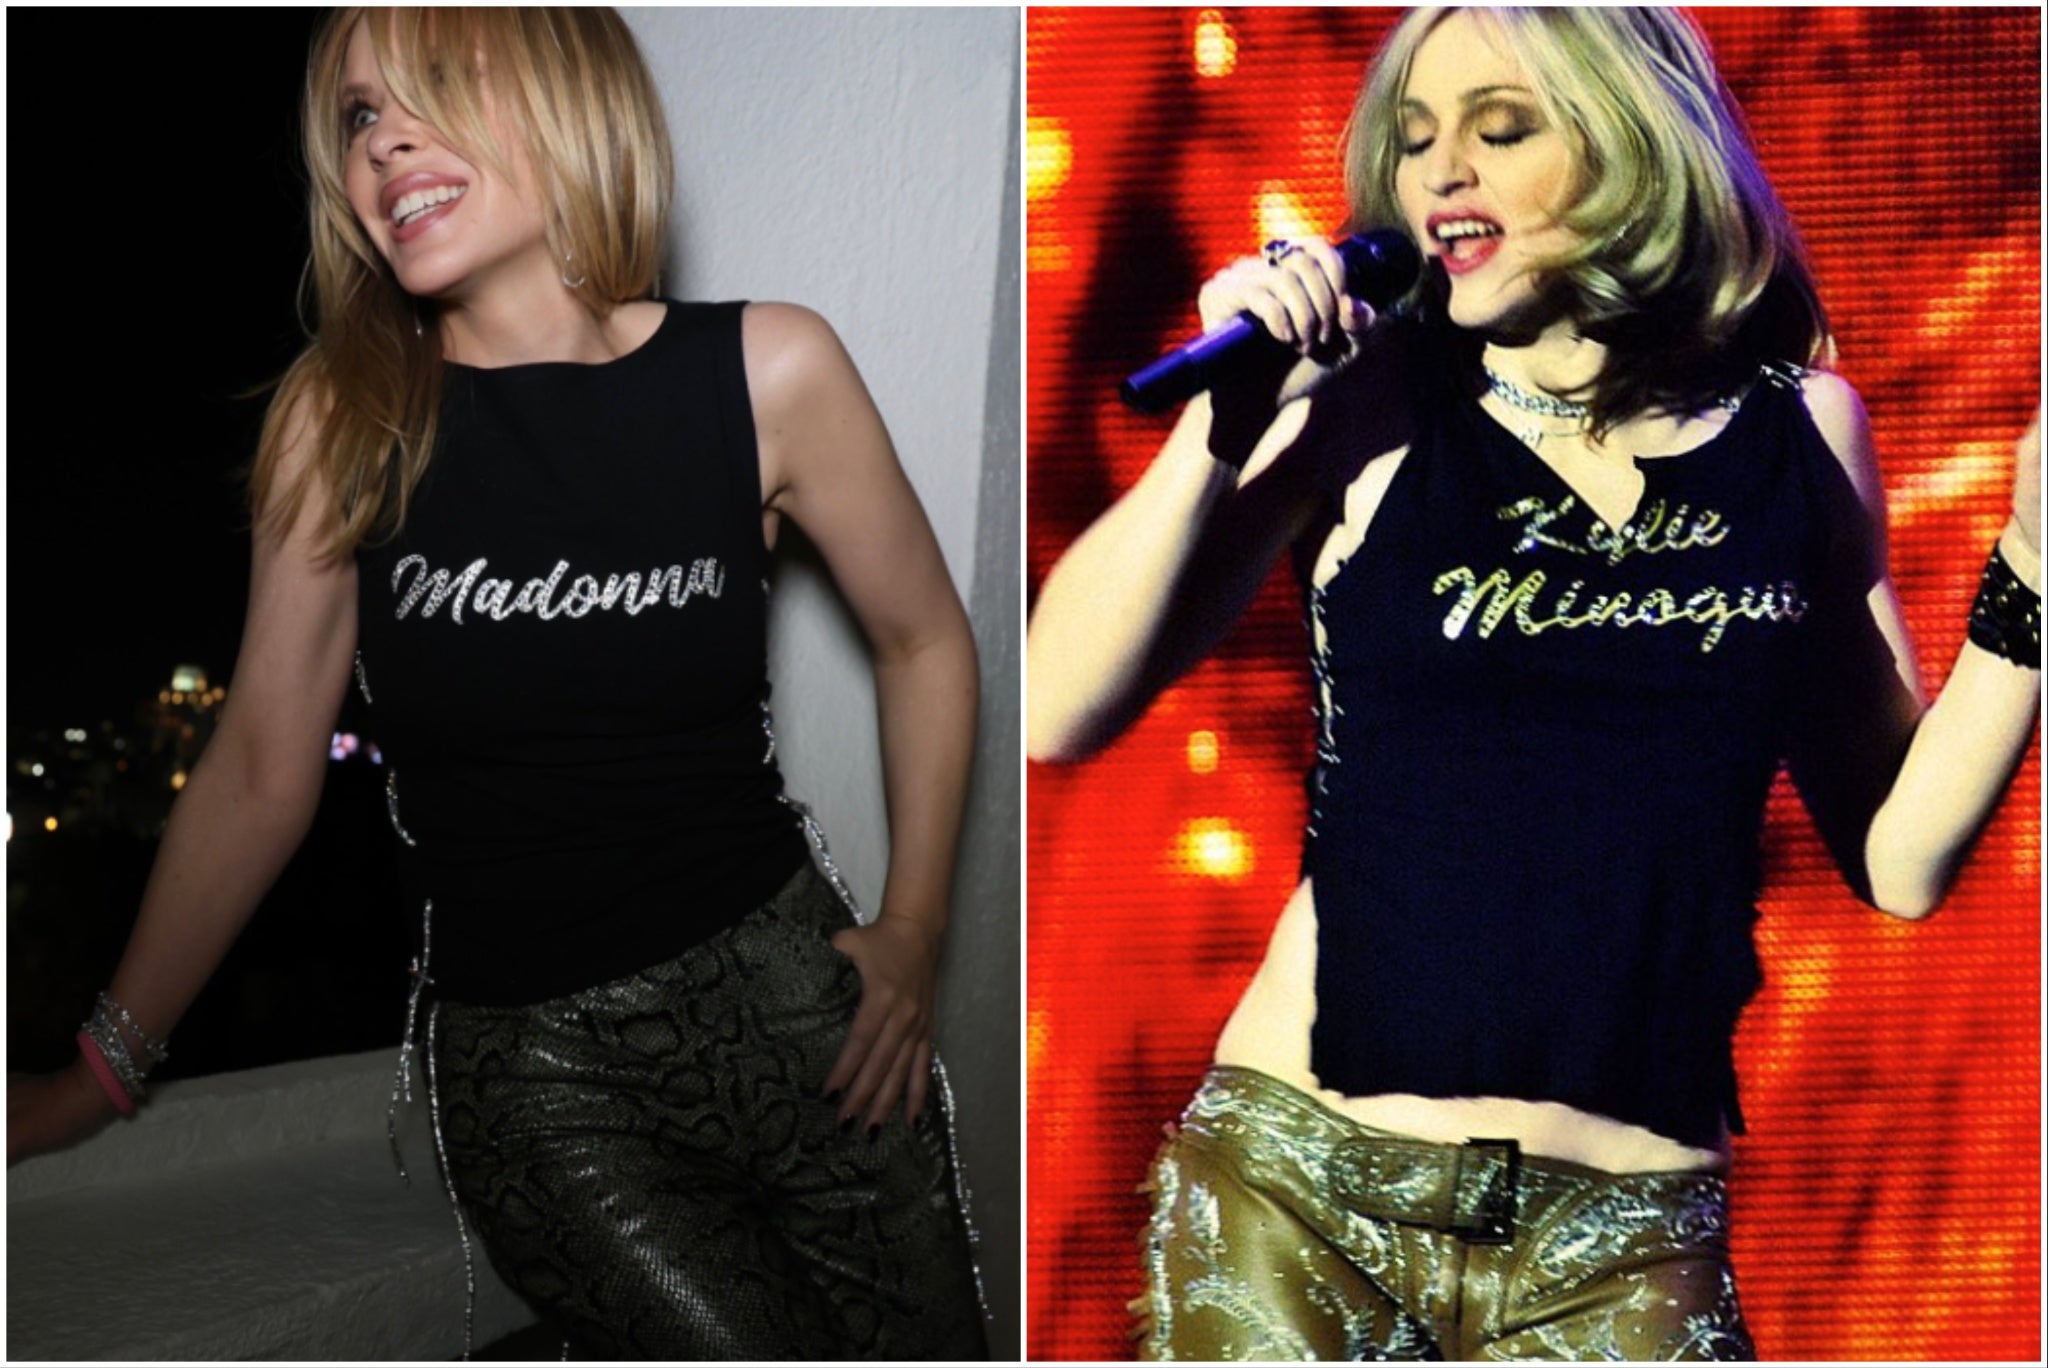 Kylie Minogue and Madonna performed together during the US star’s Celebration tour